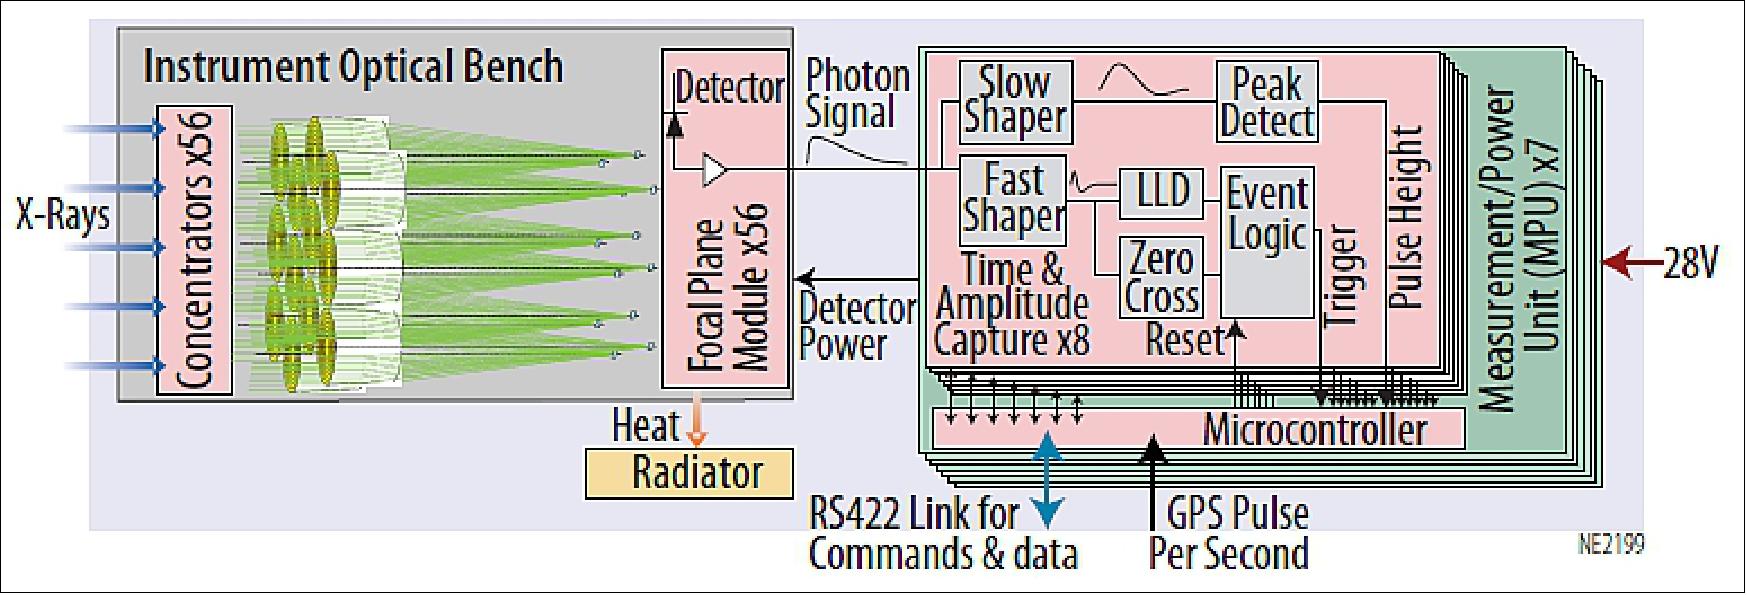 Figure 35: Block diagram of NICER XTI showing the main components: concentrators, focal plane modules, detectors and measurement and power unit (image credit: NASA, NICER/SEXTANT Team)